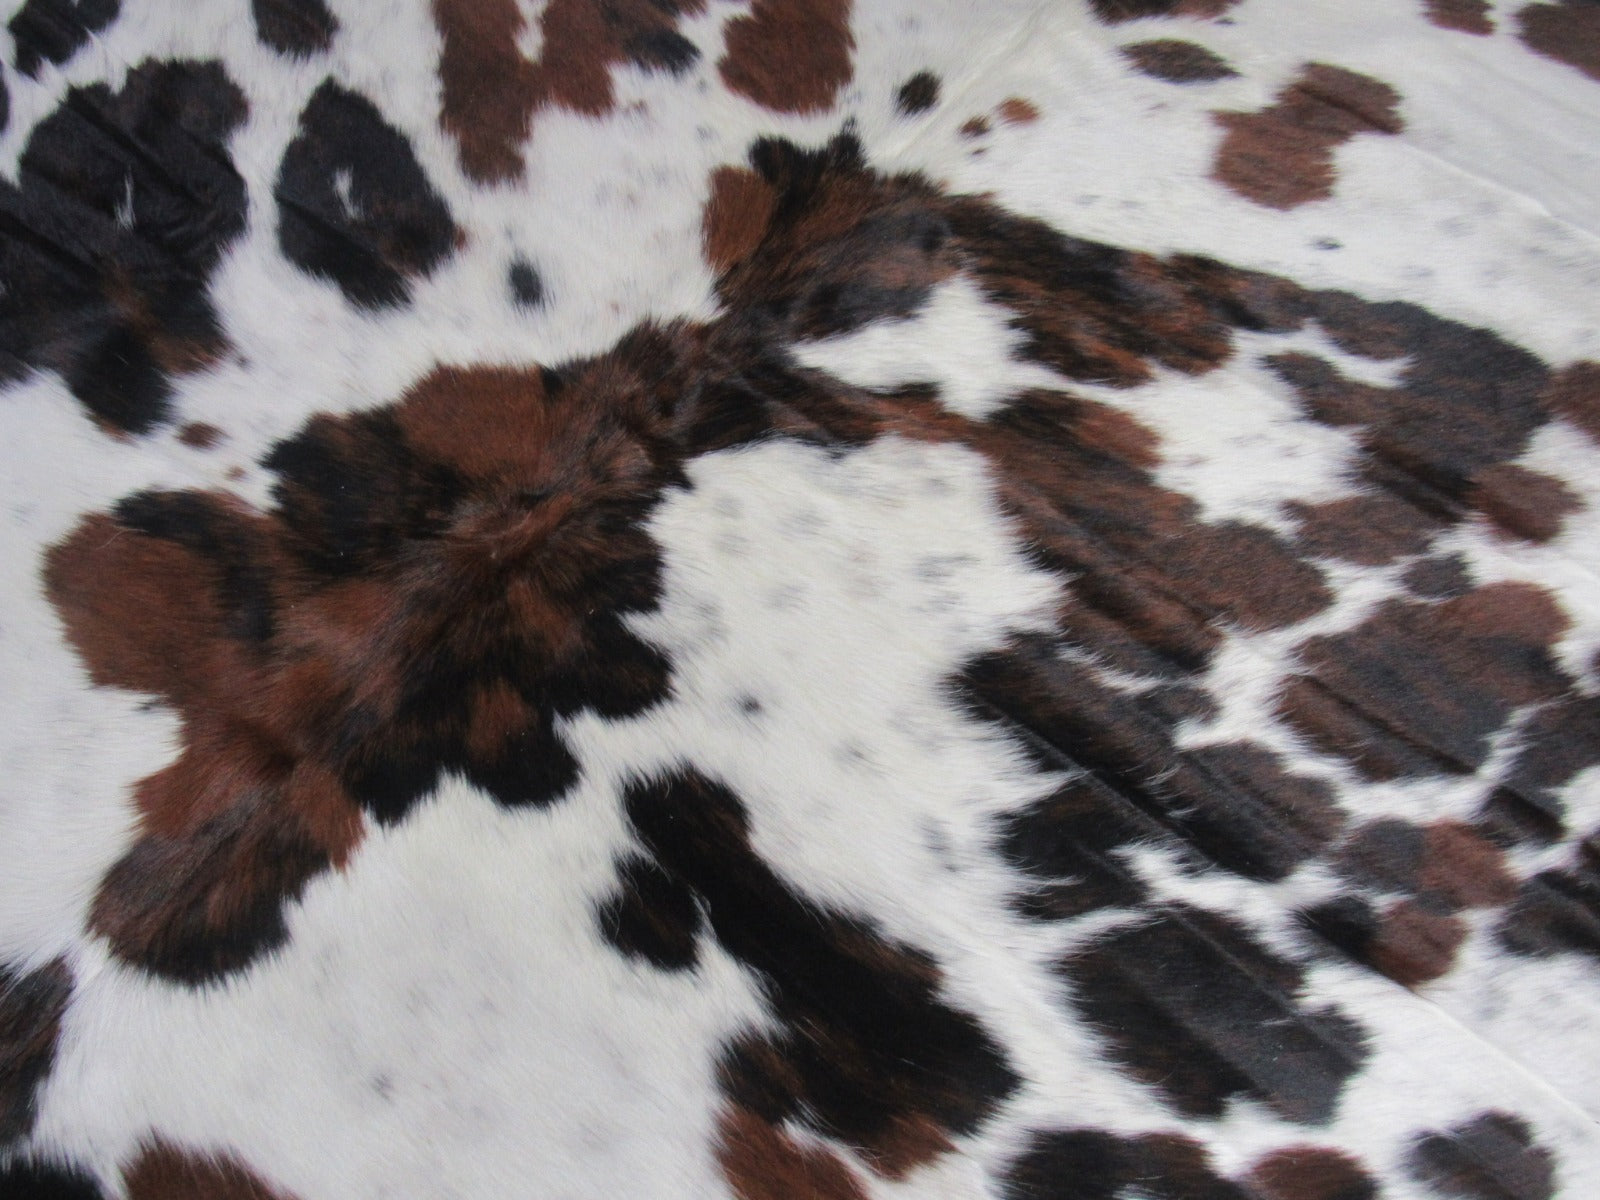 Tricolor Cowhide Rug (lots of white and even spots) Size: 7x7.2 feet M-1193